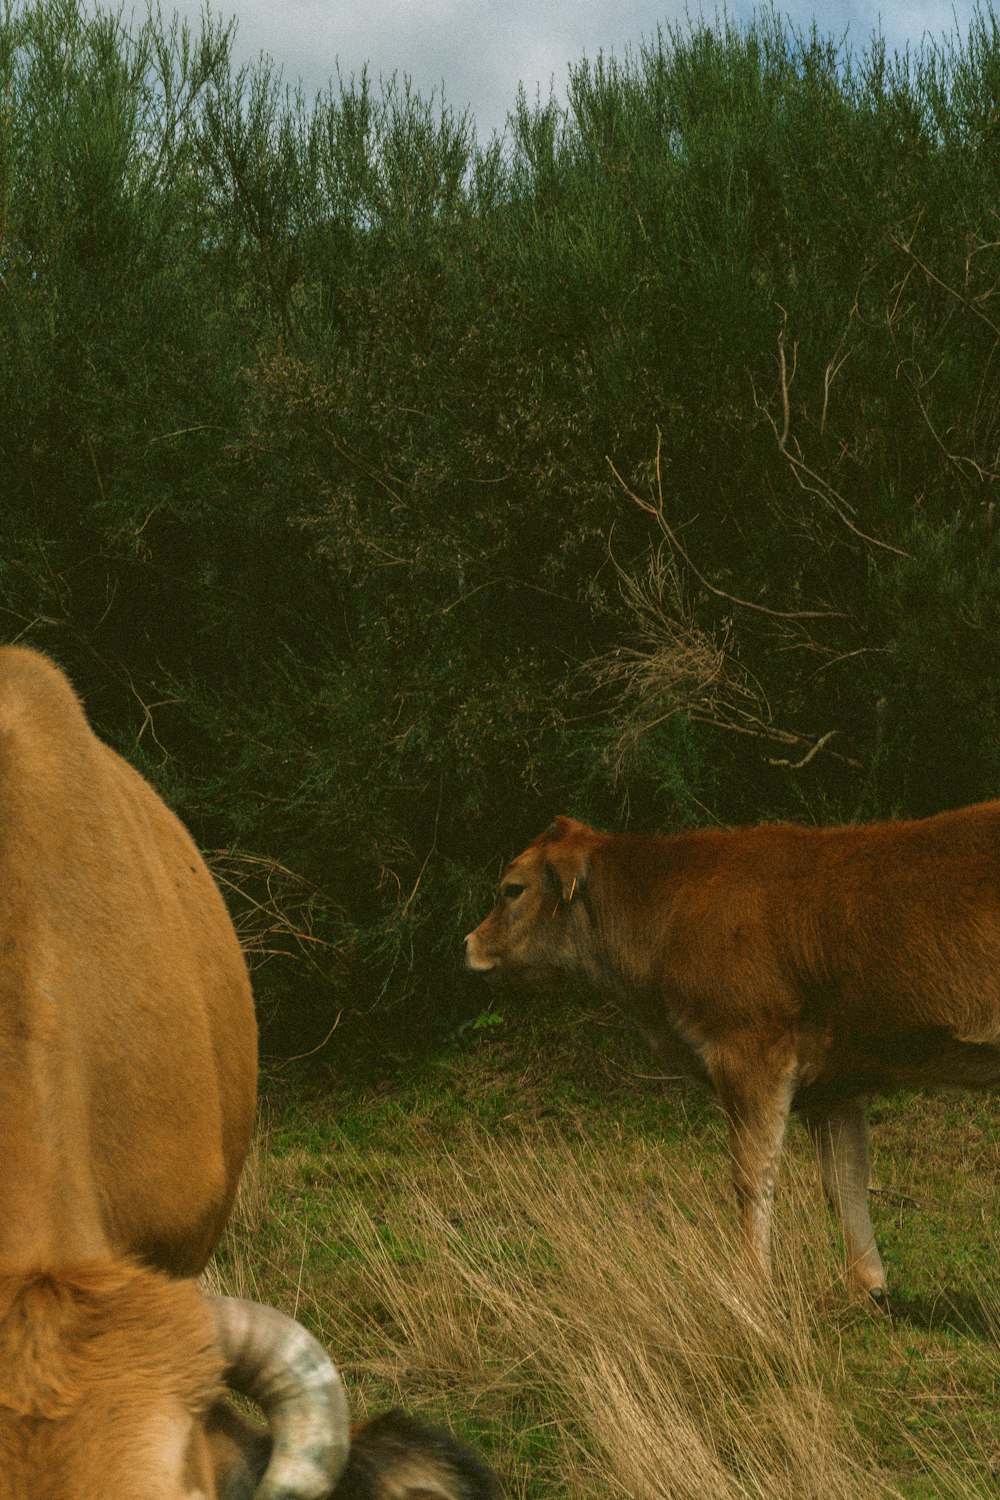 a brown cow standing next to a brown cow on a lush green field